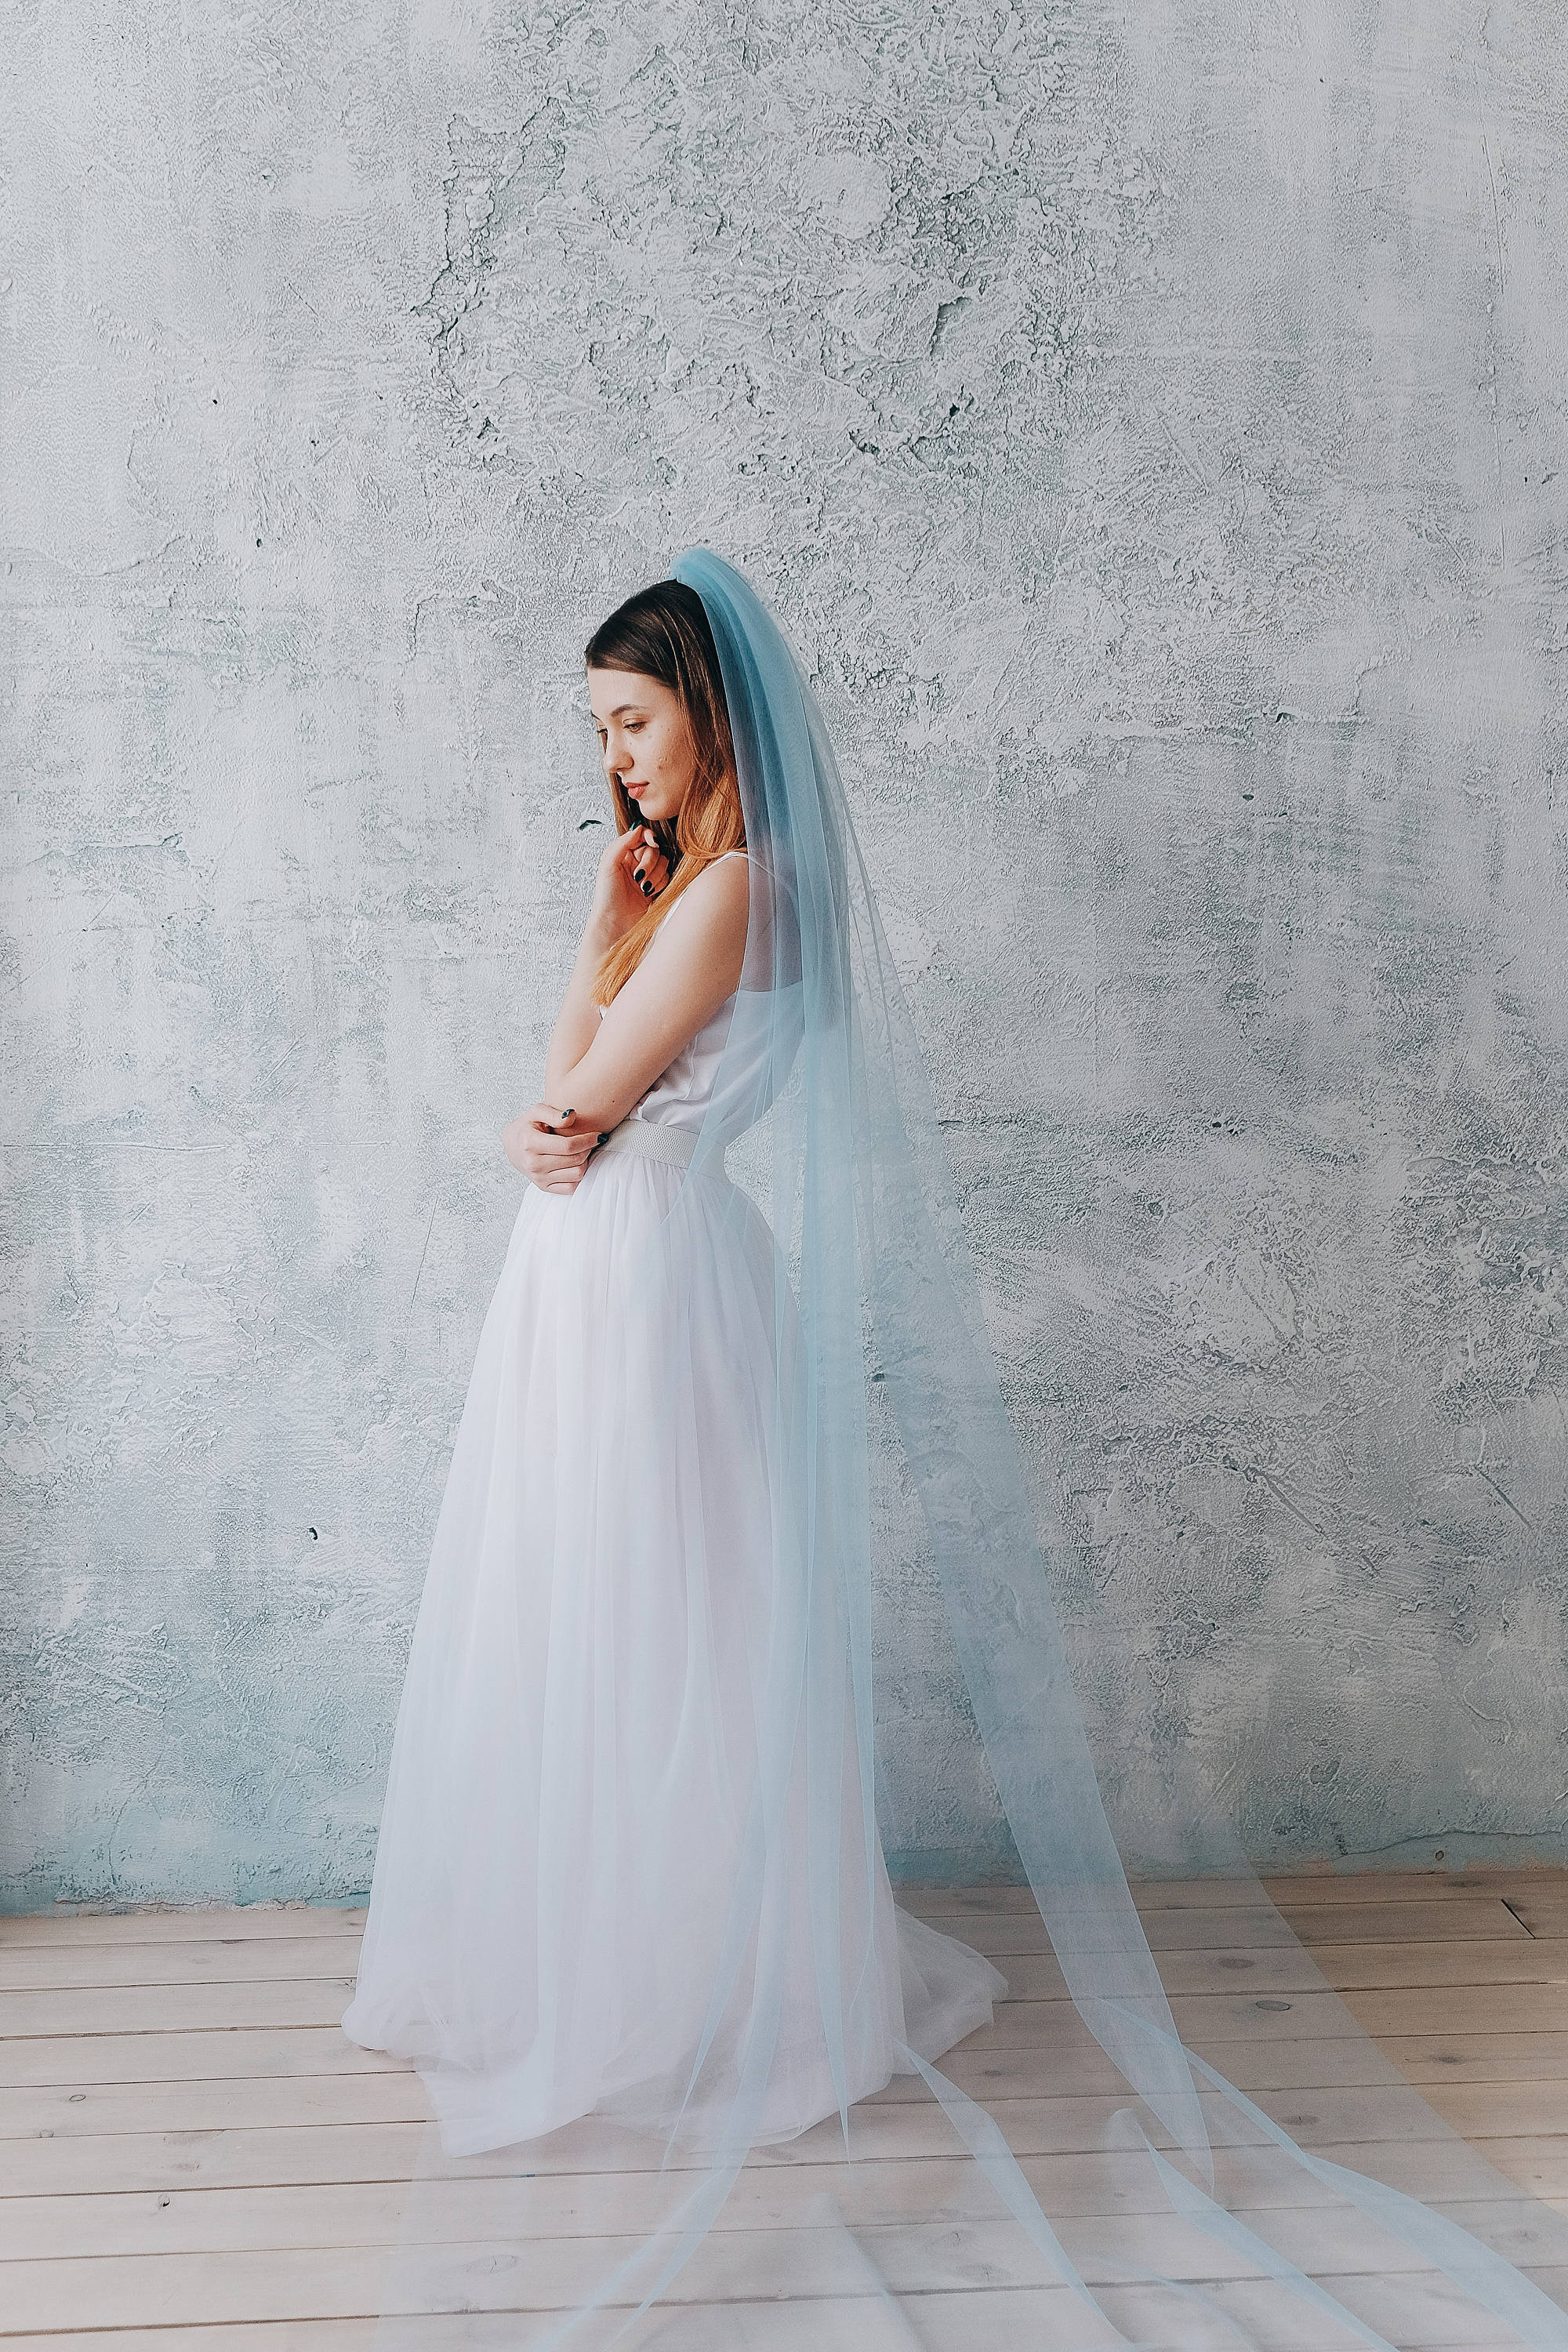 A woman wears a wedding dress in front of a grey concrete wall.